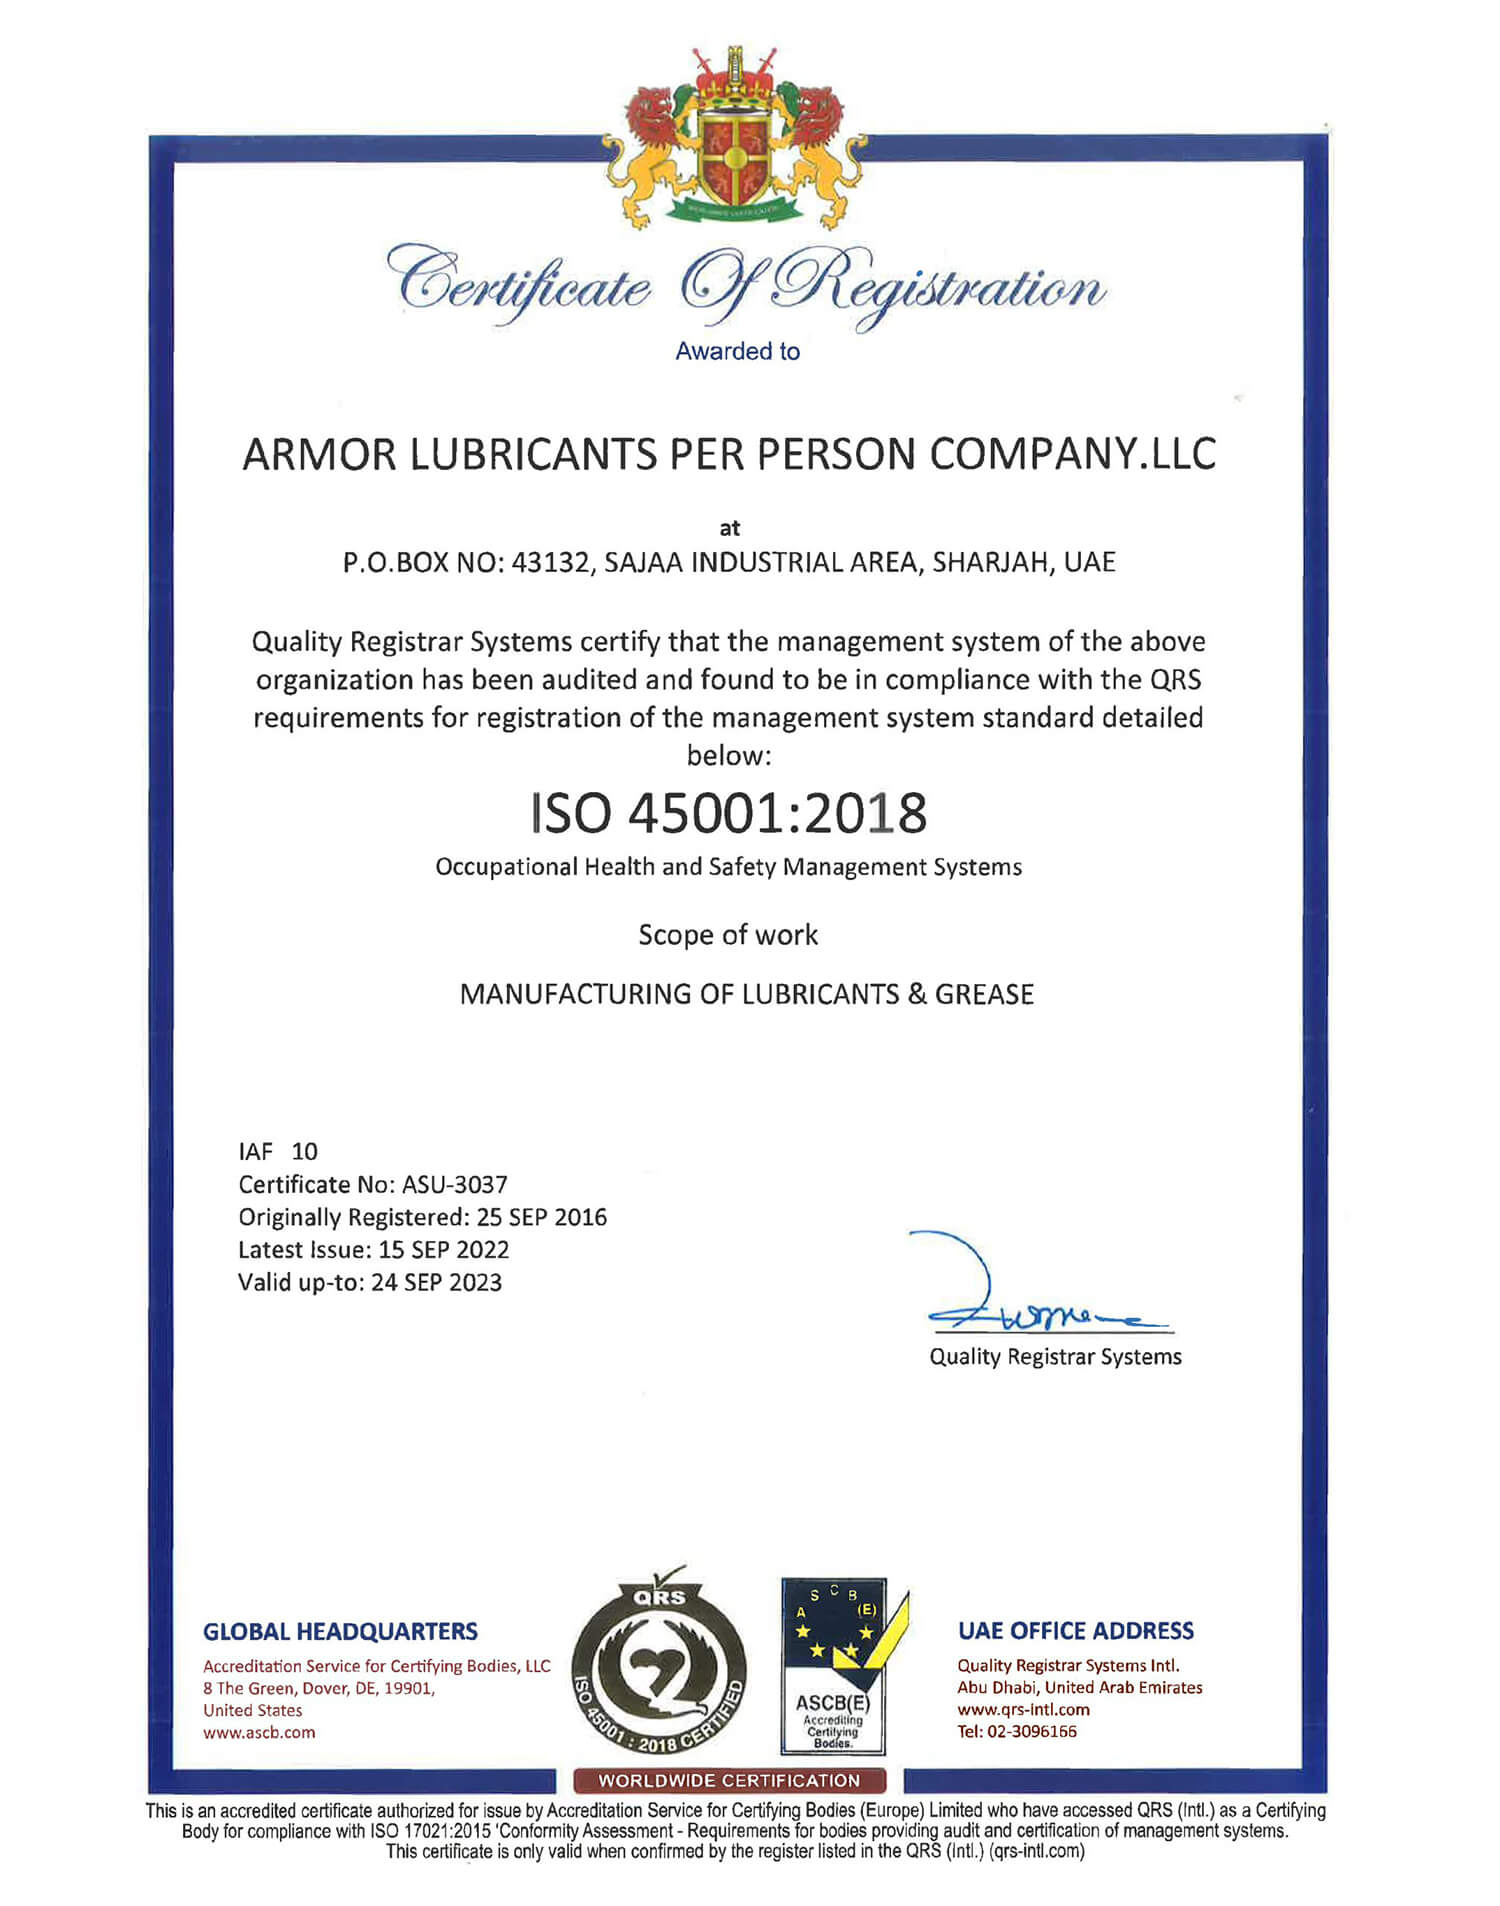 Armor Lubricants ISO 45001 Occupational Health and Safety (OH&S) Management System Certification